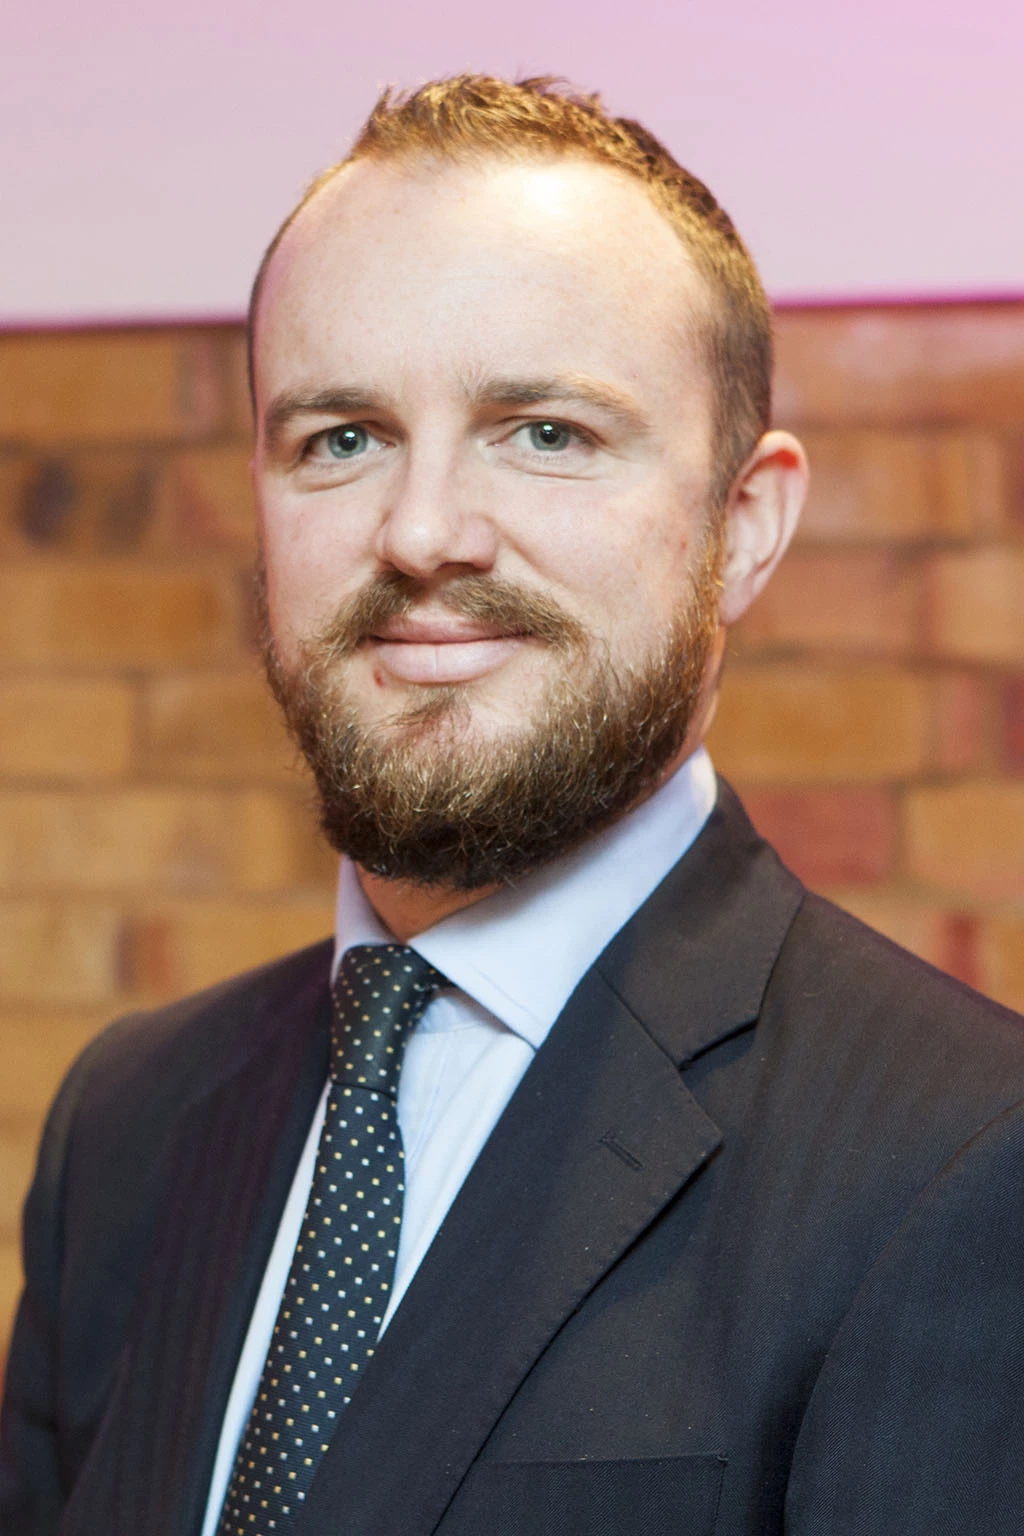 Tim Wynn-Jones, UK Head of Distributed Energy Solutions Sales at Centrica Business Solutions